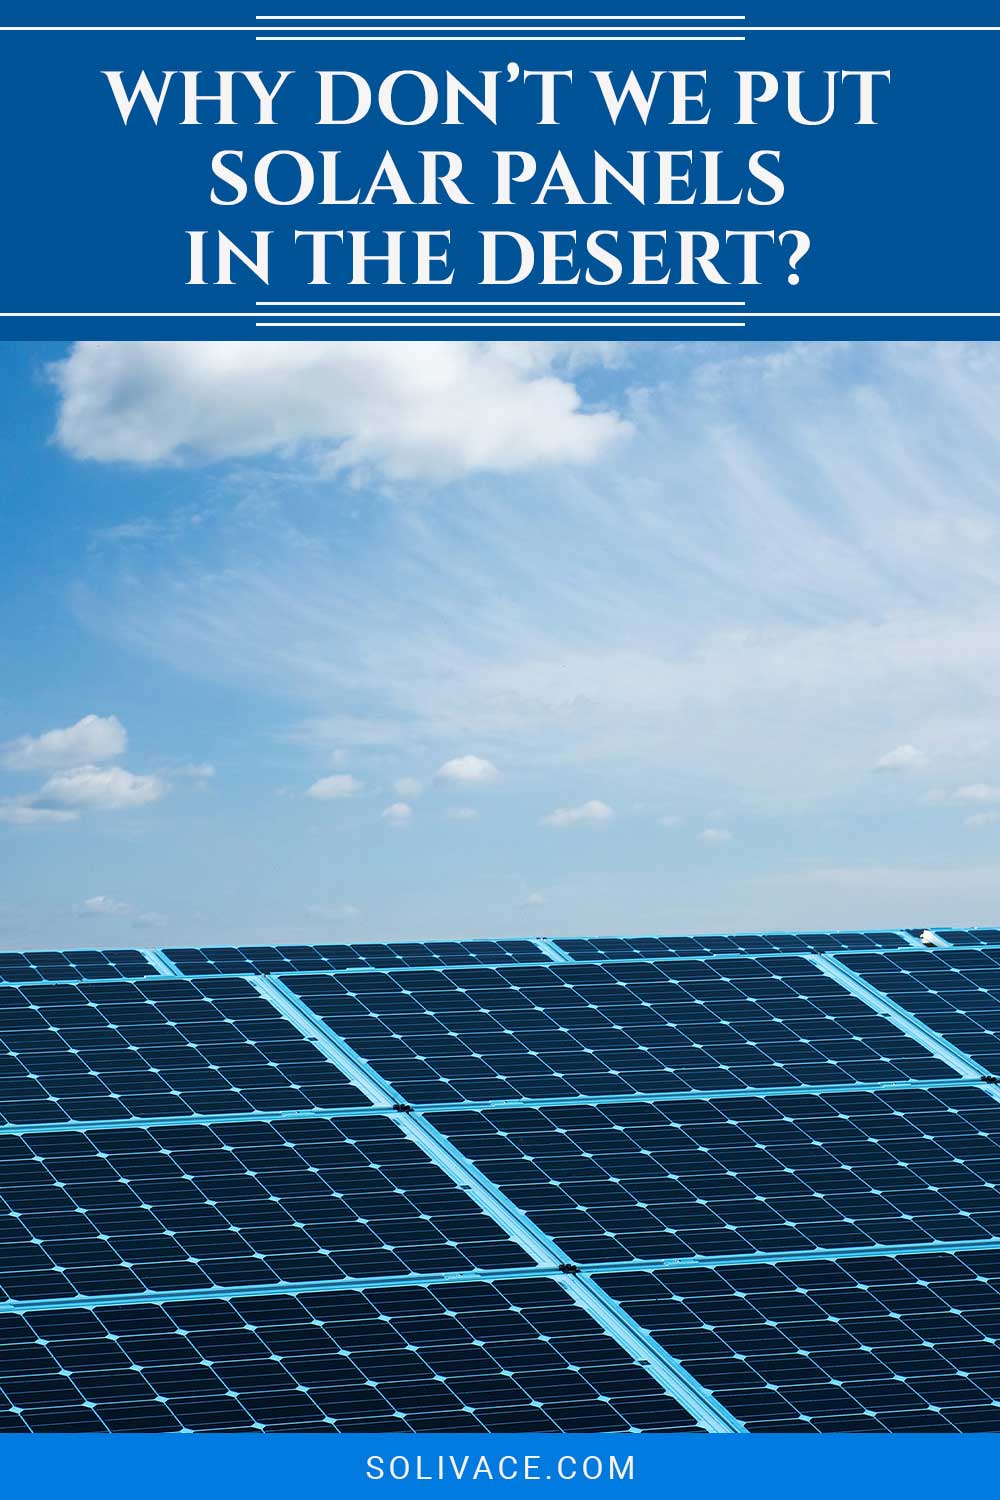 Why Don’t We Put Solar Panels In The Desert?